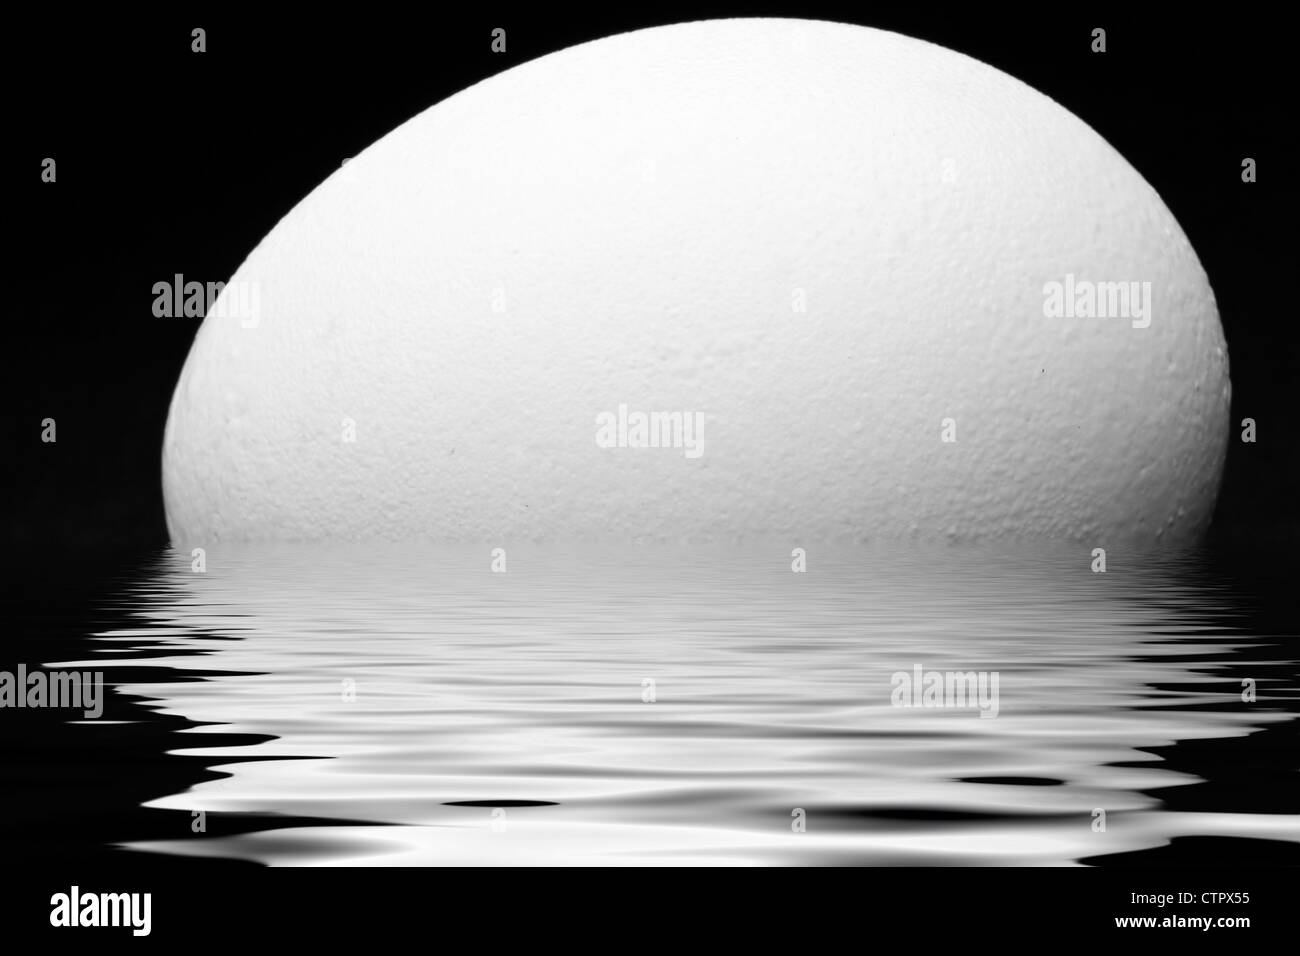 White chicken egg partially submerged in water Stock Photo